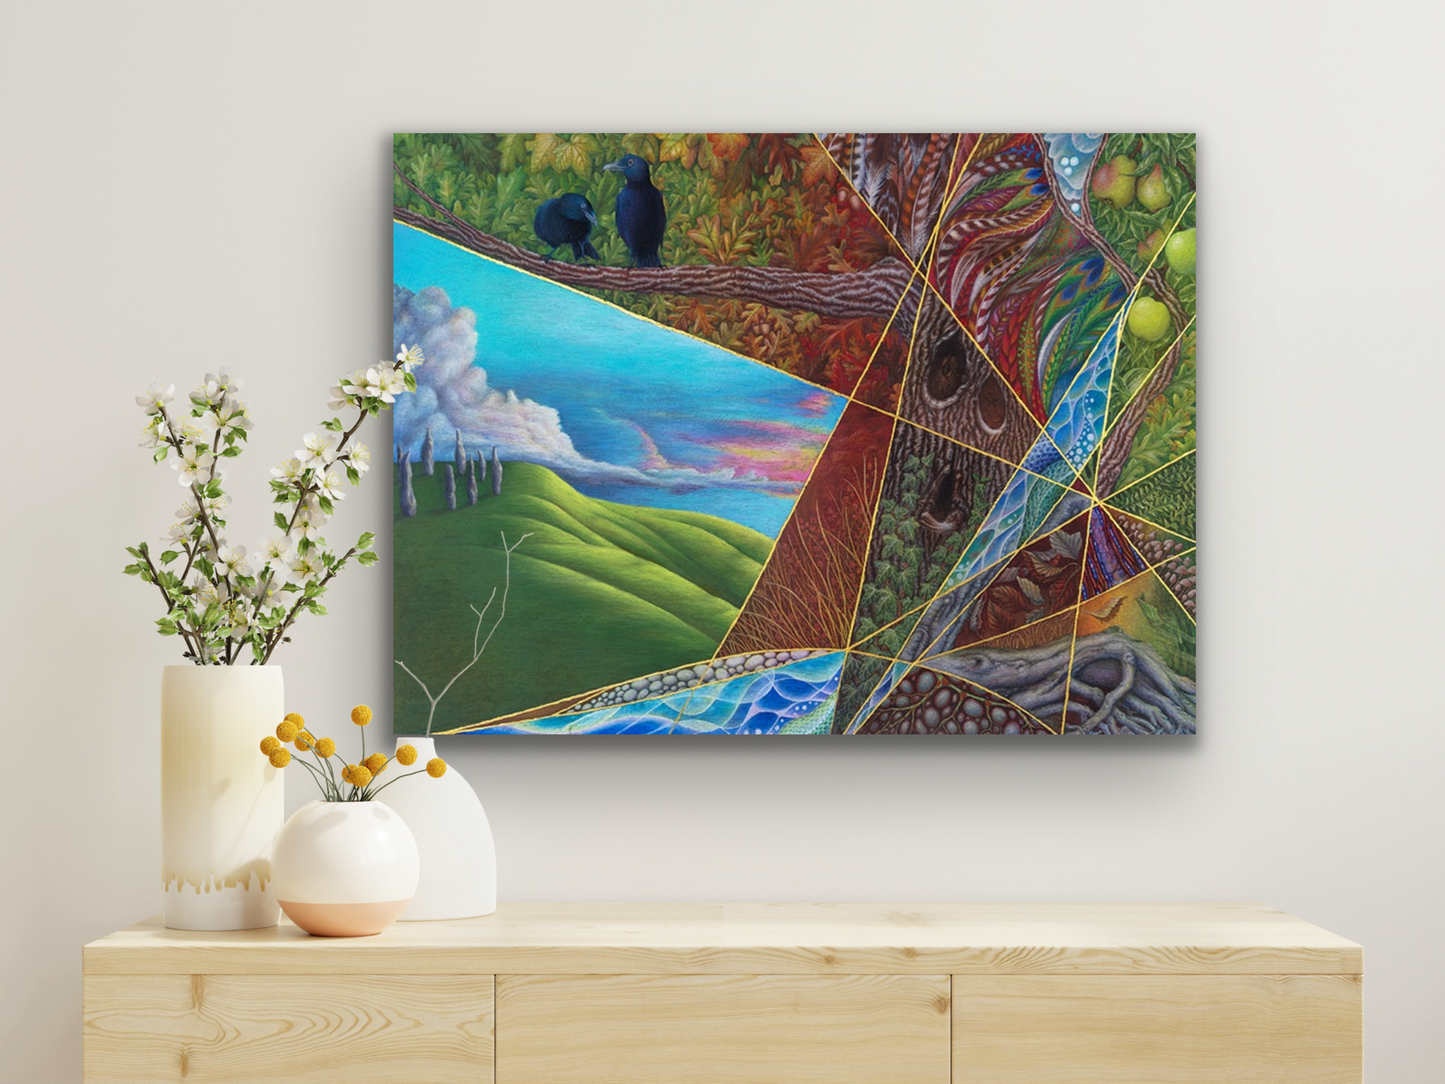 This stunning work of art comes in four different canvas print sizes.